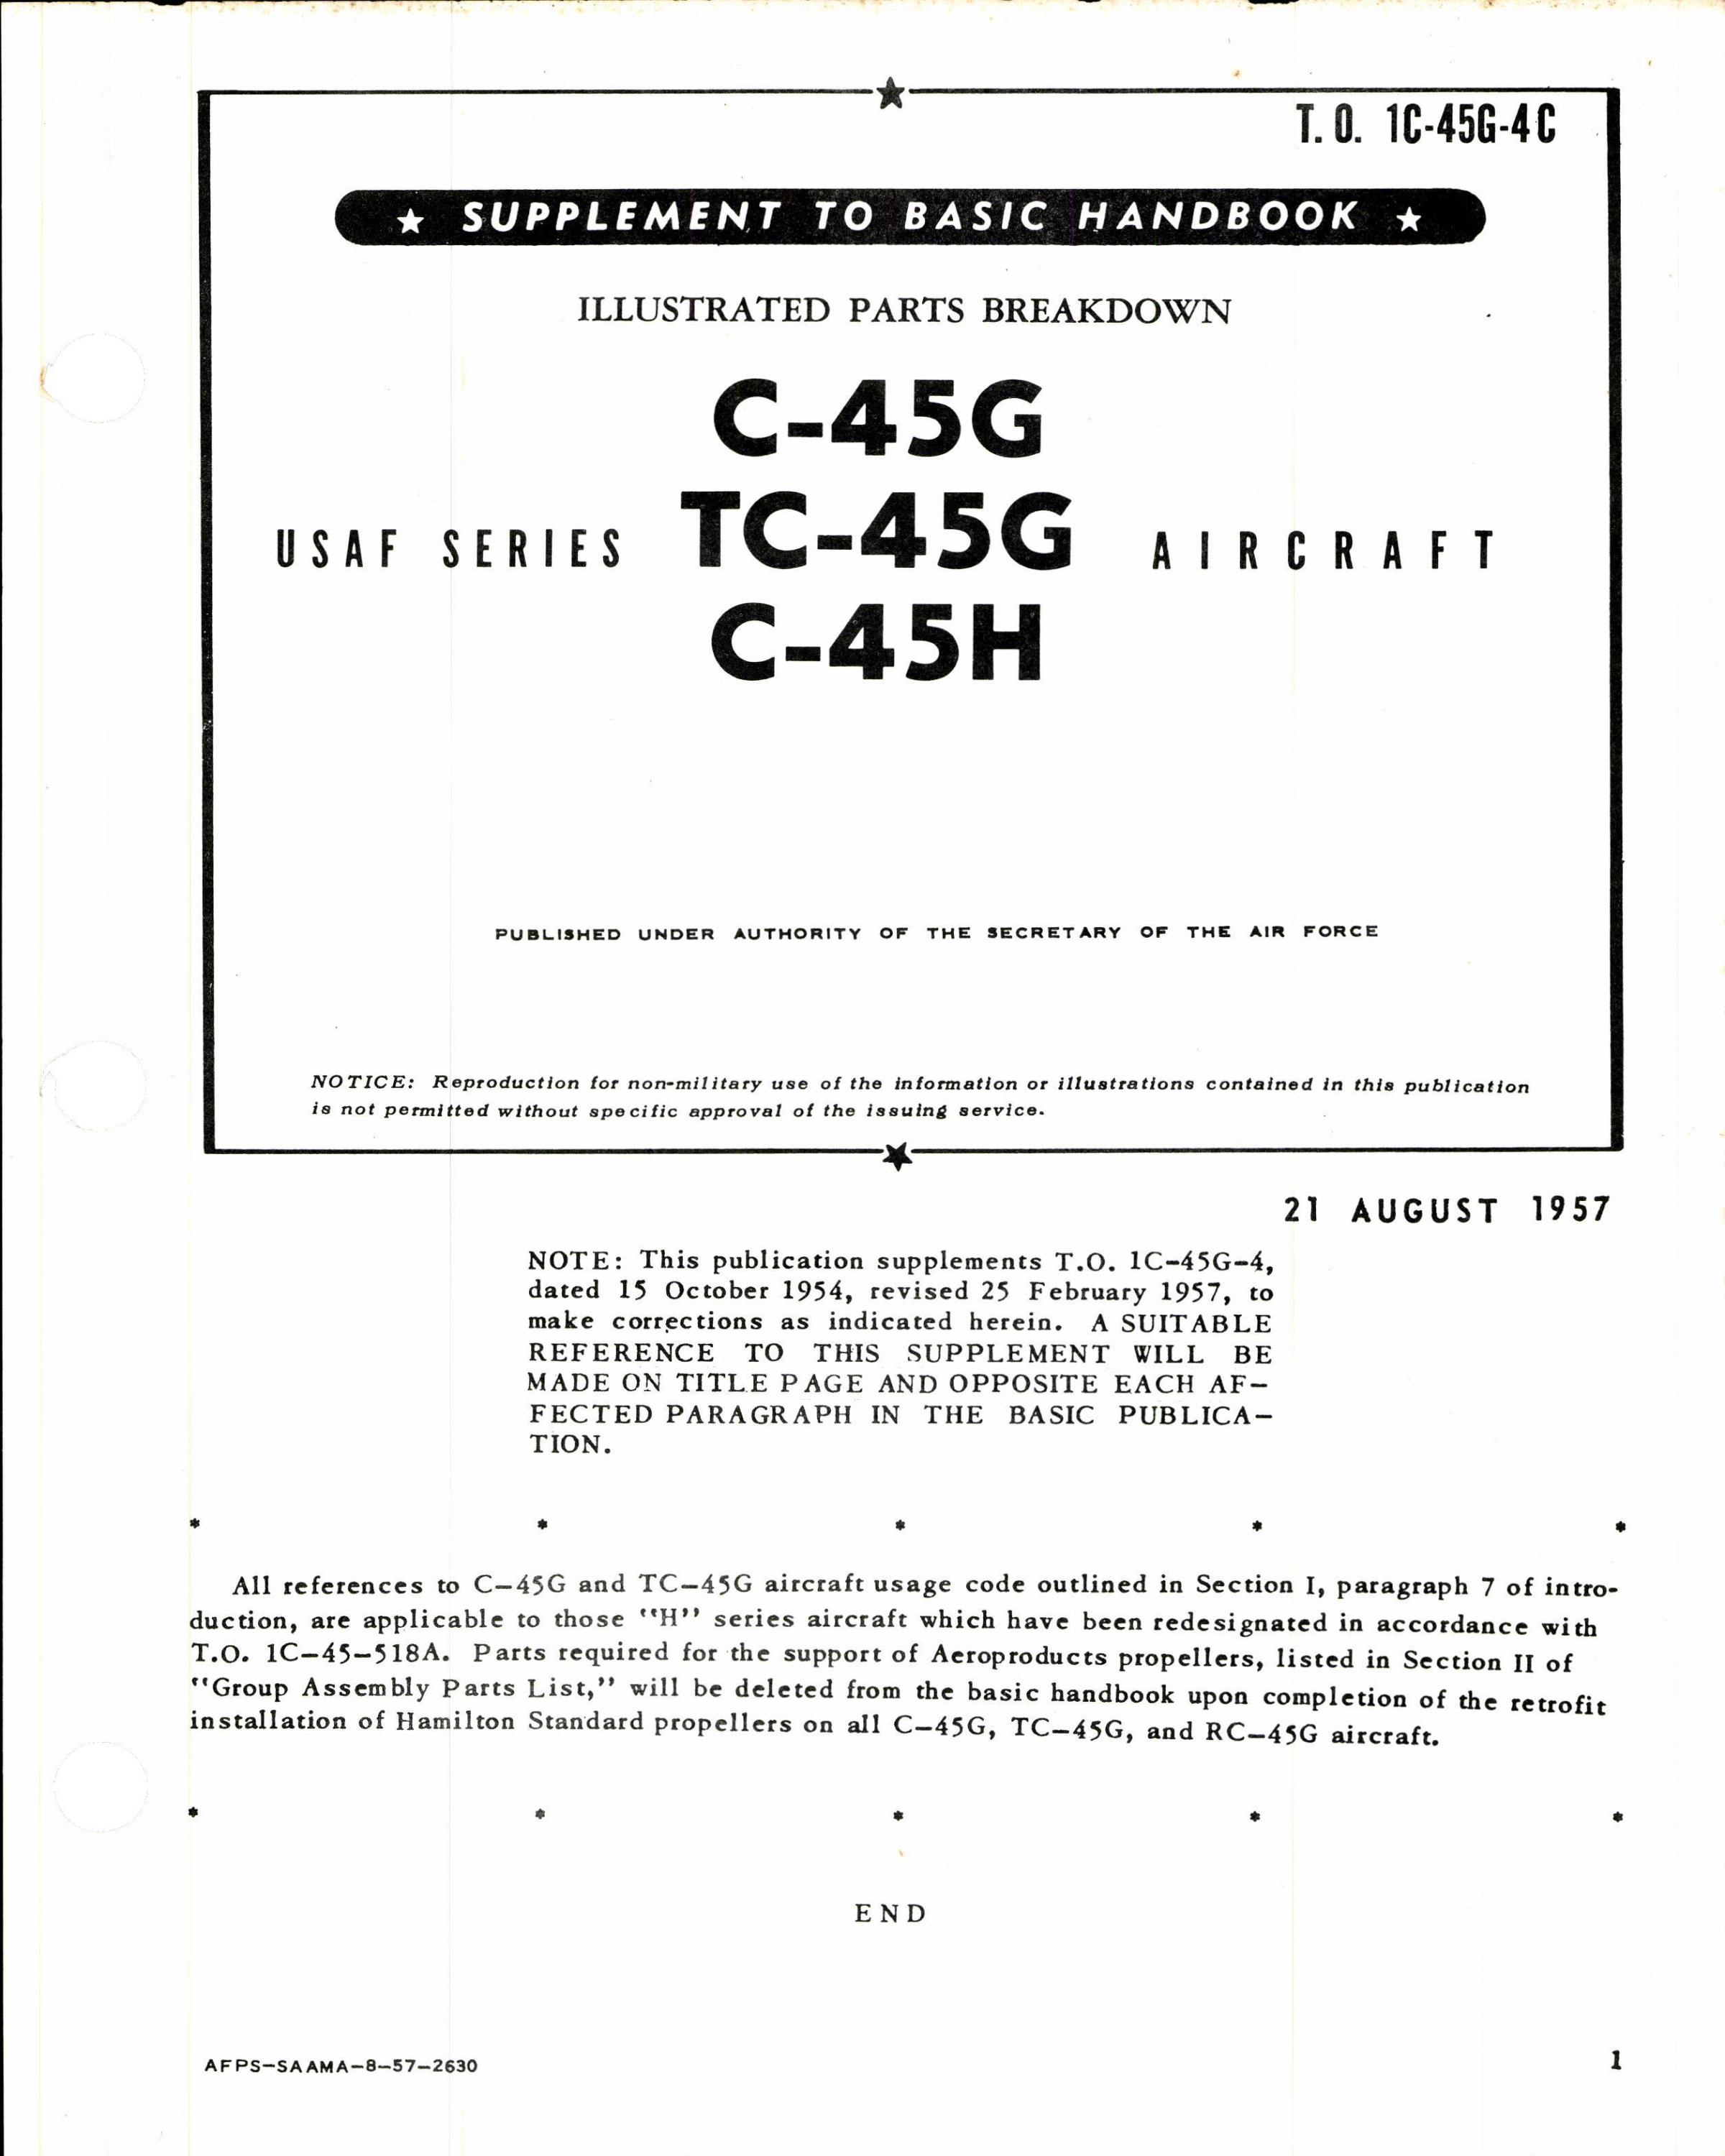 Sample page 1 from AirCorps Library document: Illustrated Parts Breakdown for C-45G, TC-45G, and C-45H